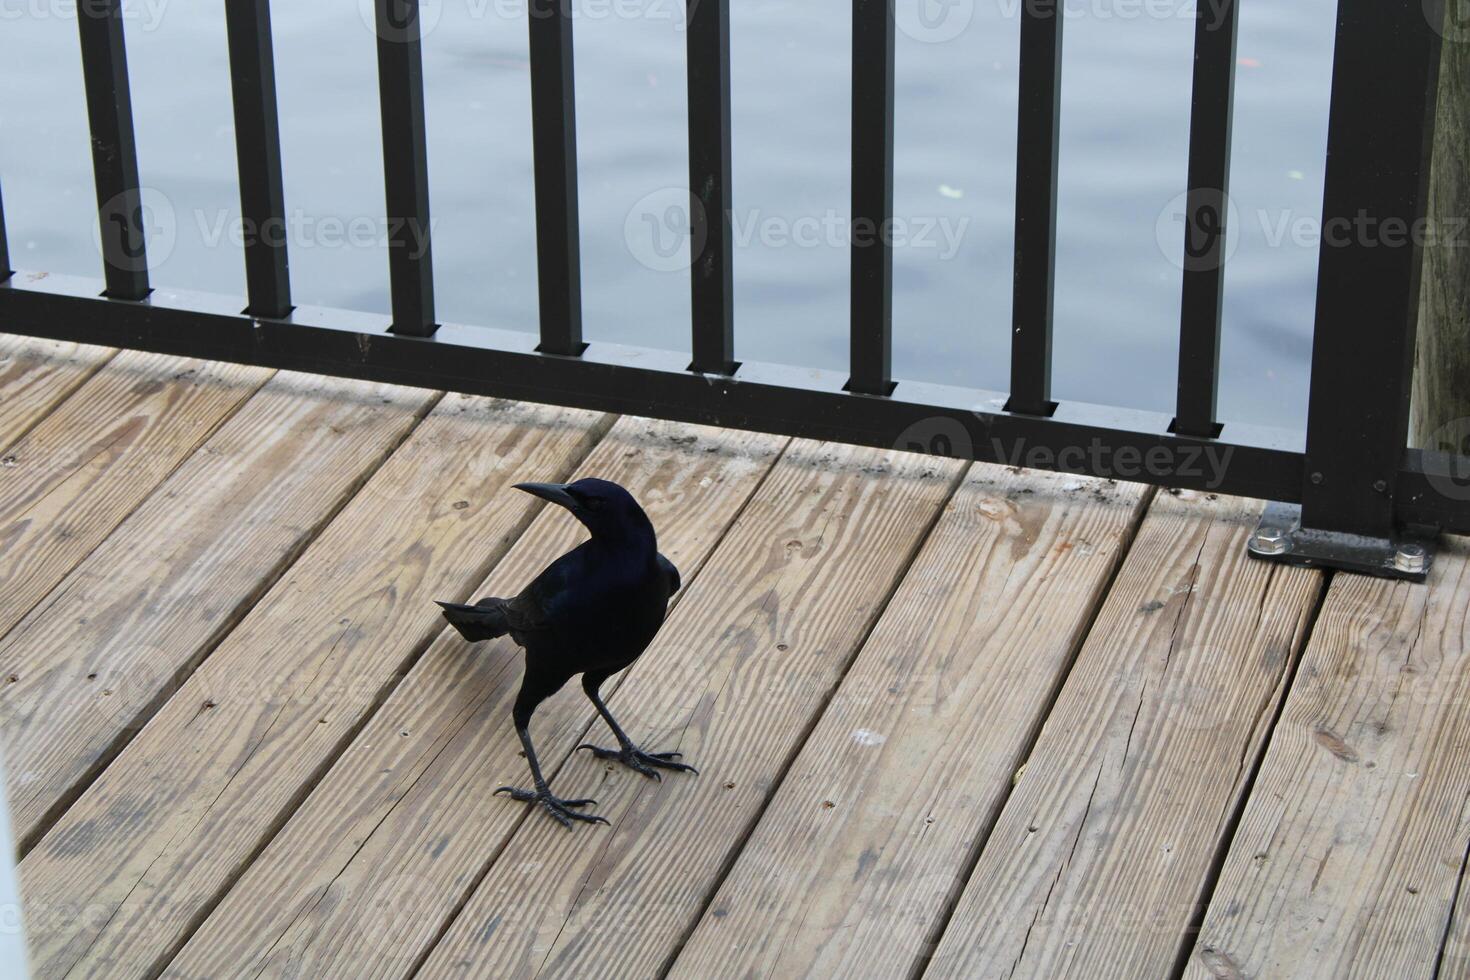 Common Grackle Hanging Out On The Sponge Docks In Tarpon Springs Florida. photo